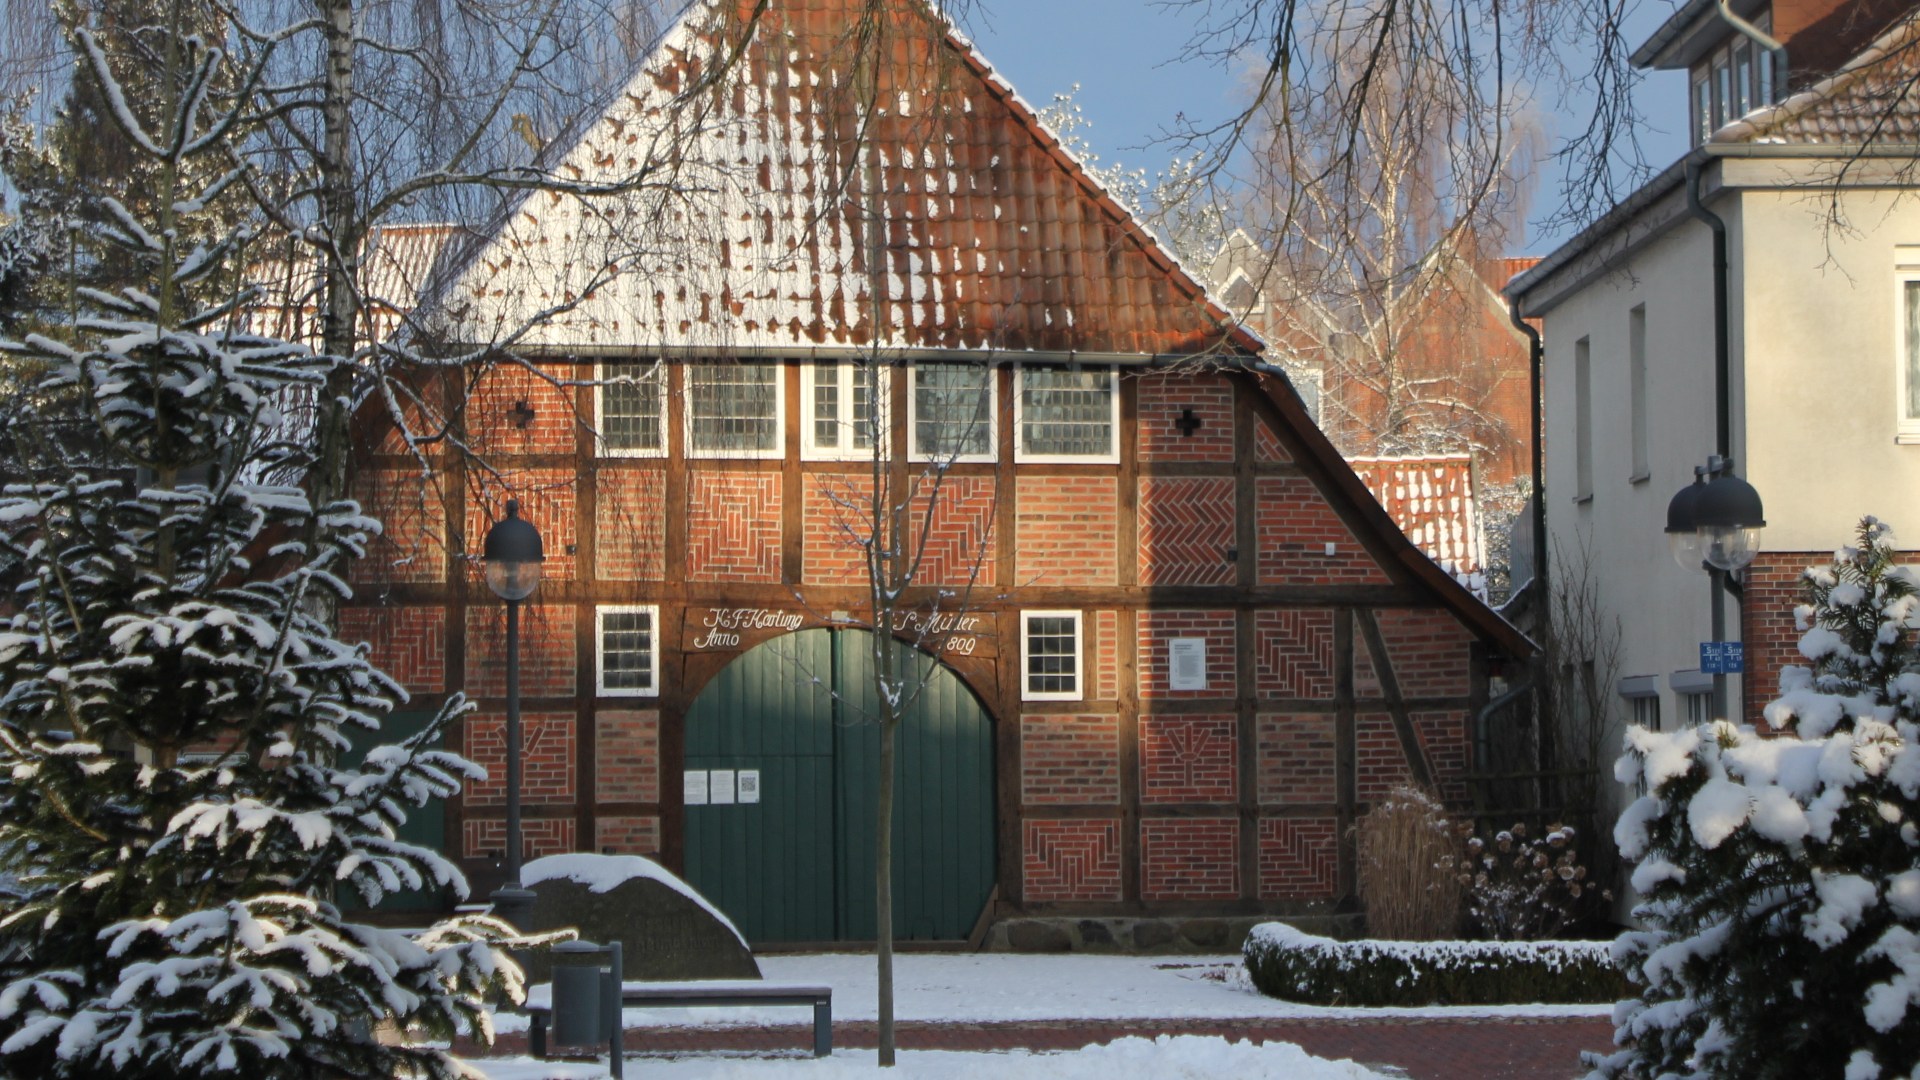 The Römstedt House Museum in Winter